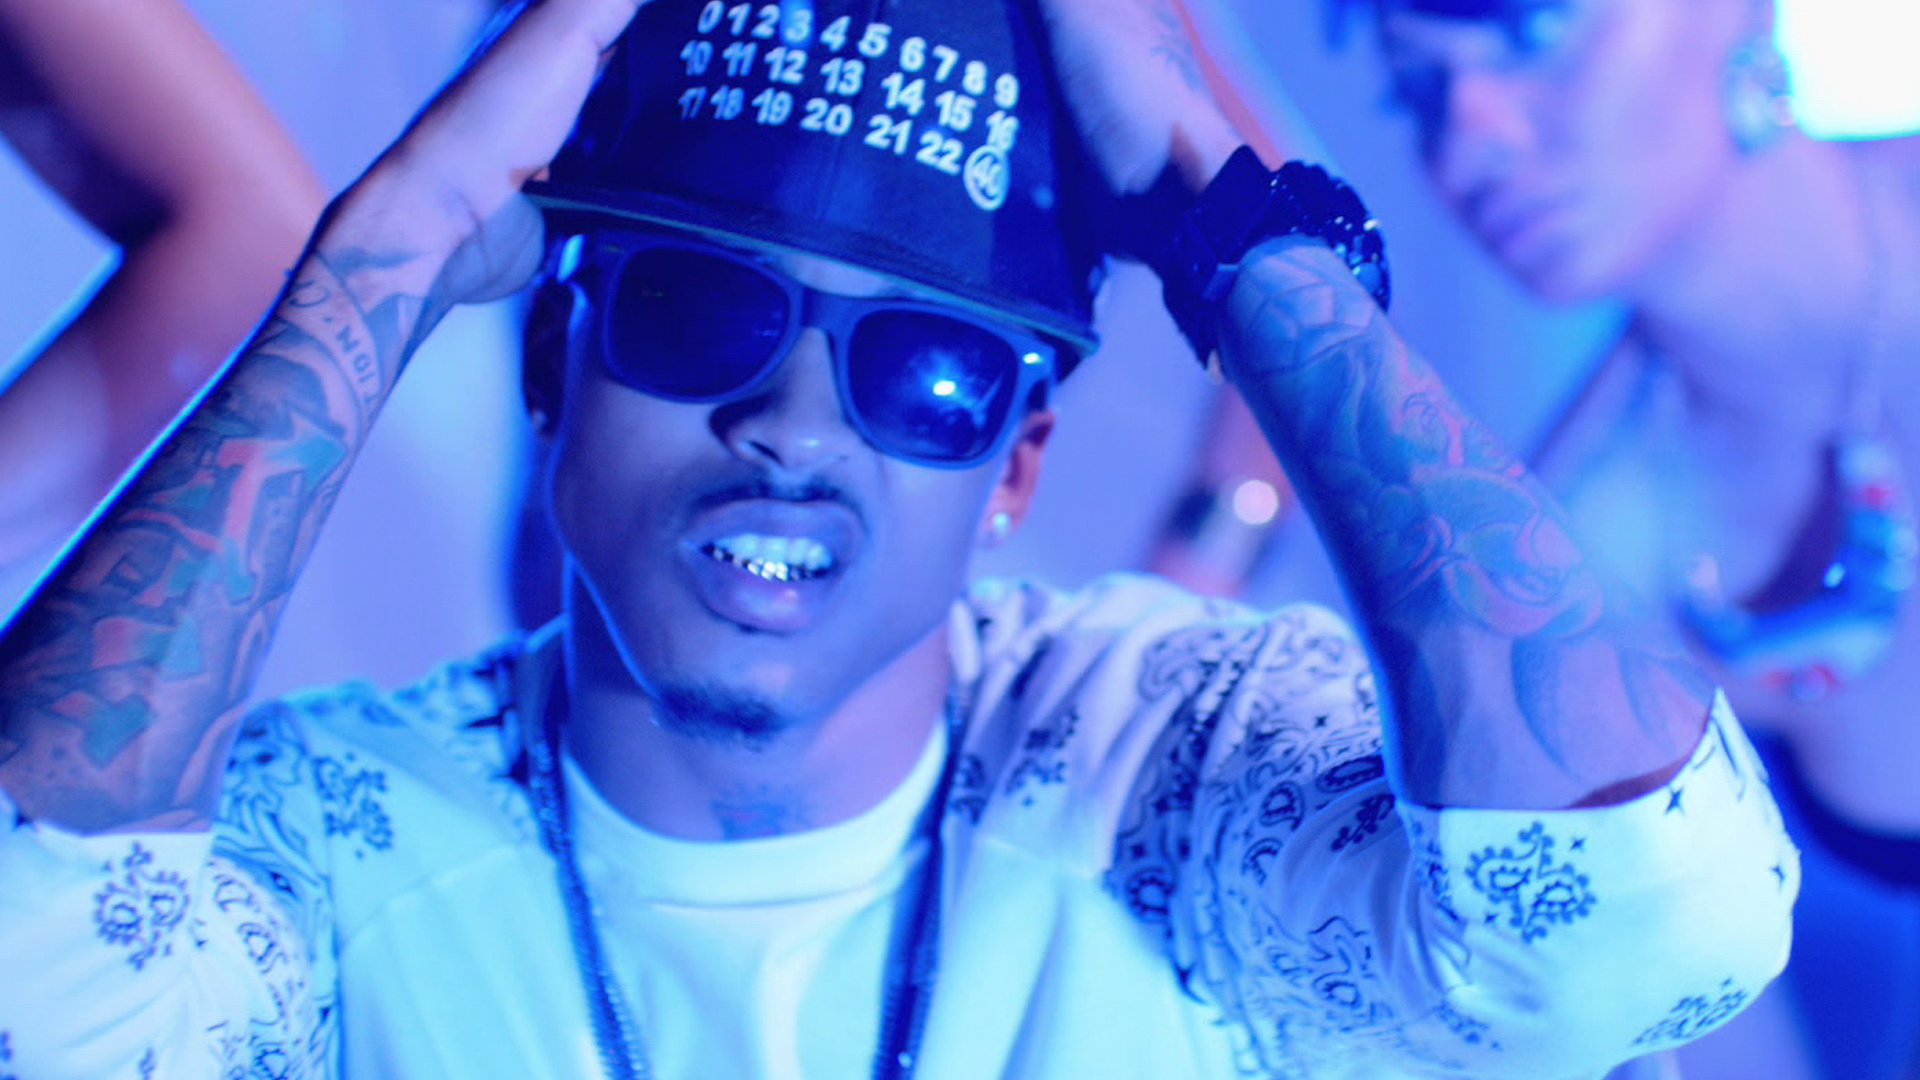 565147 1920x1080 august alsina pictures free for desktop JPG 117 kB  Rare  Gallery HD Wallpapers